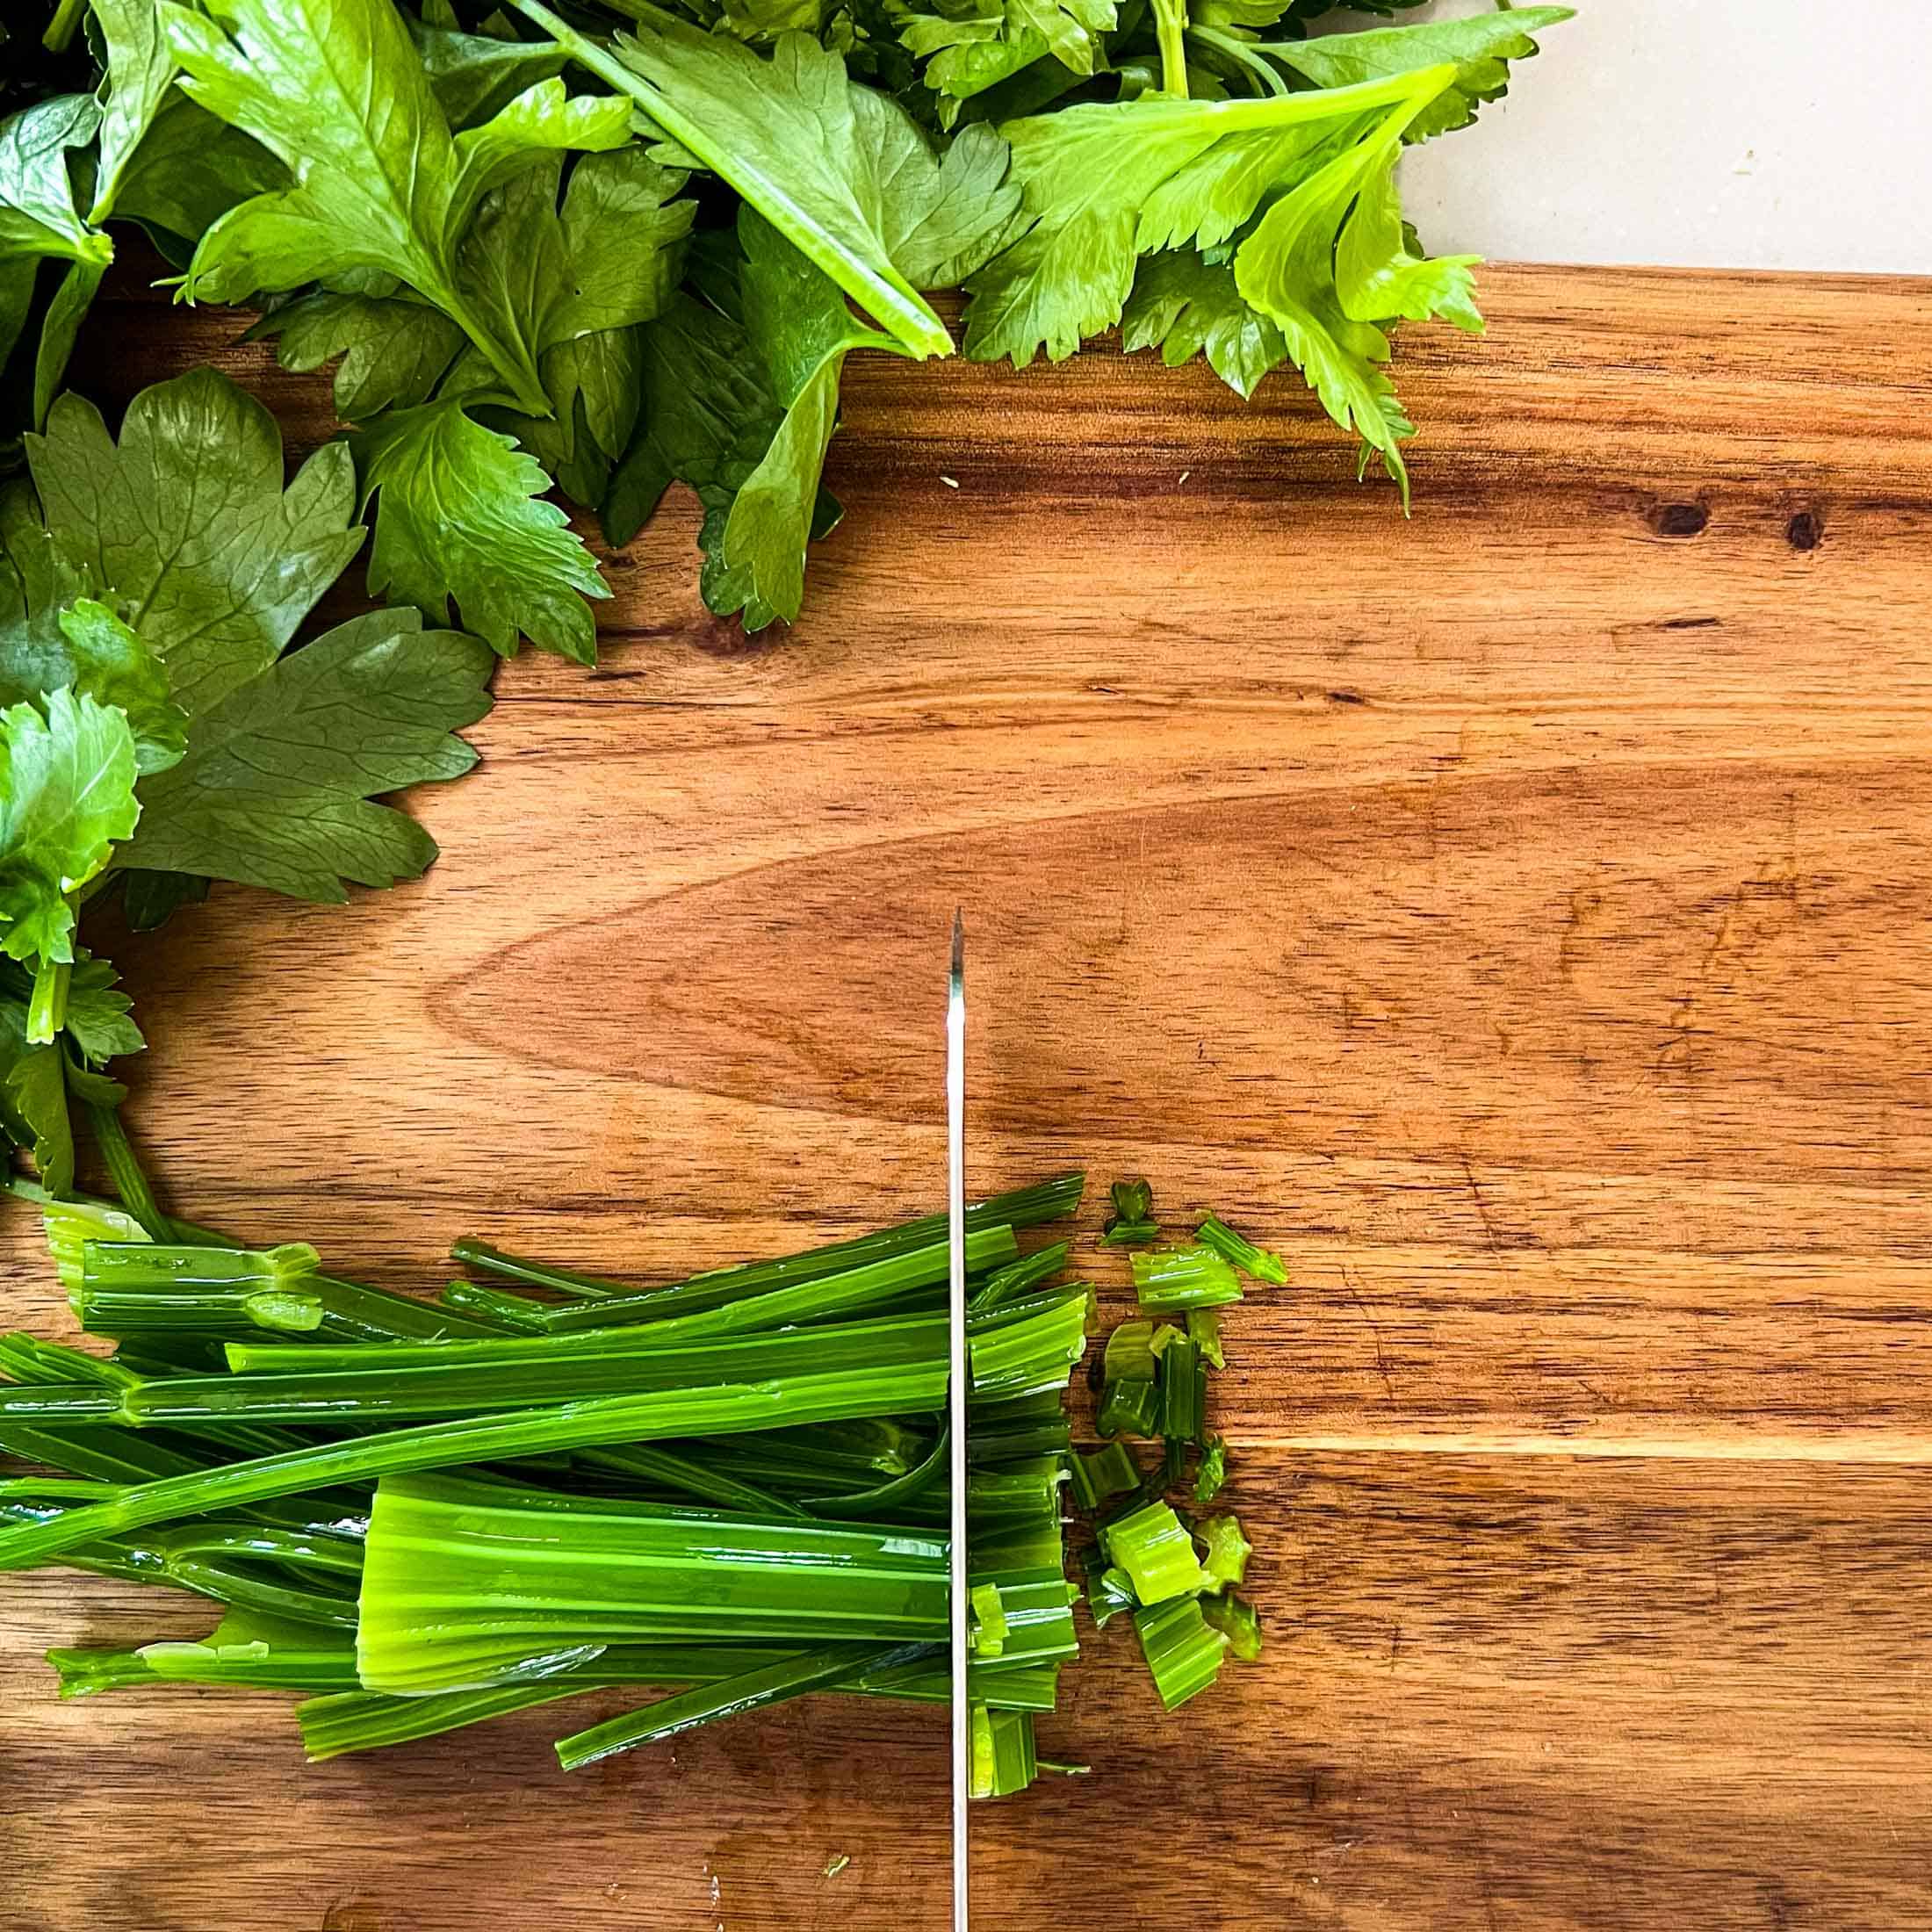 Blanched celery being cut on a wooden cutting board.